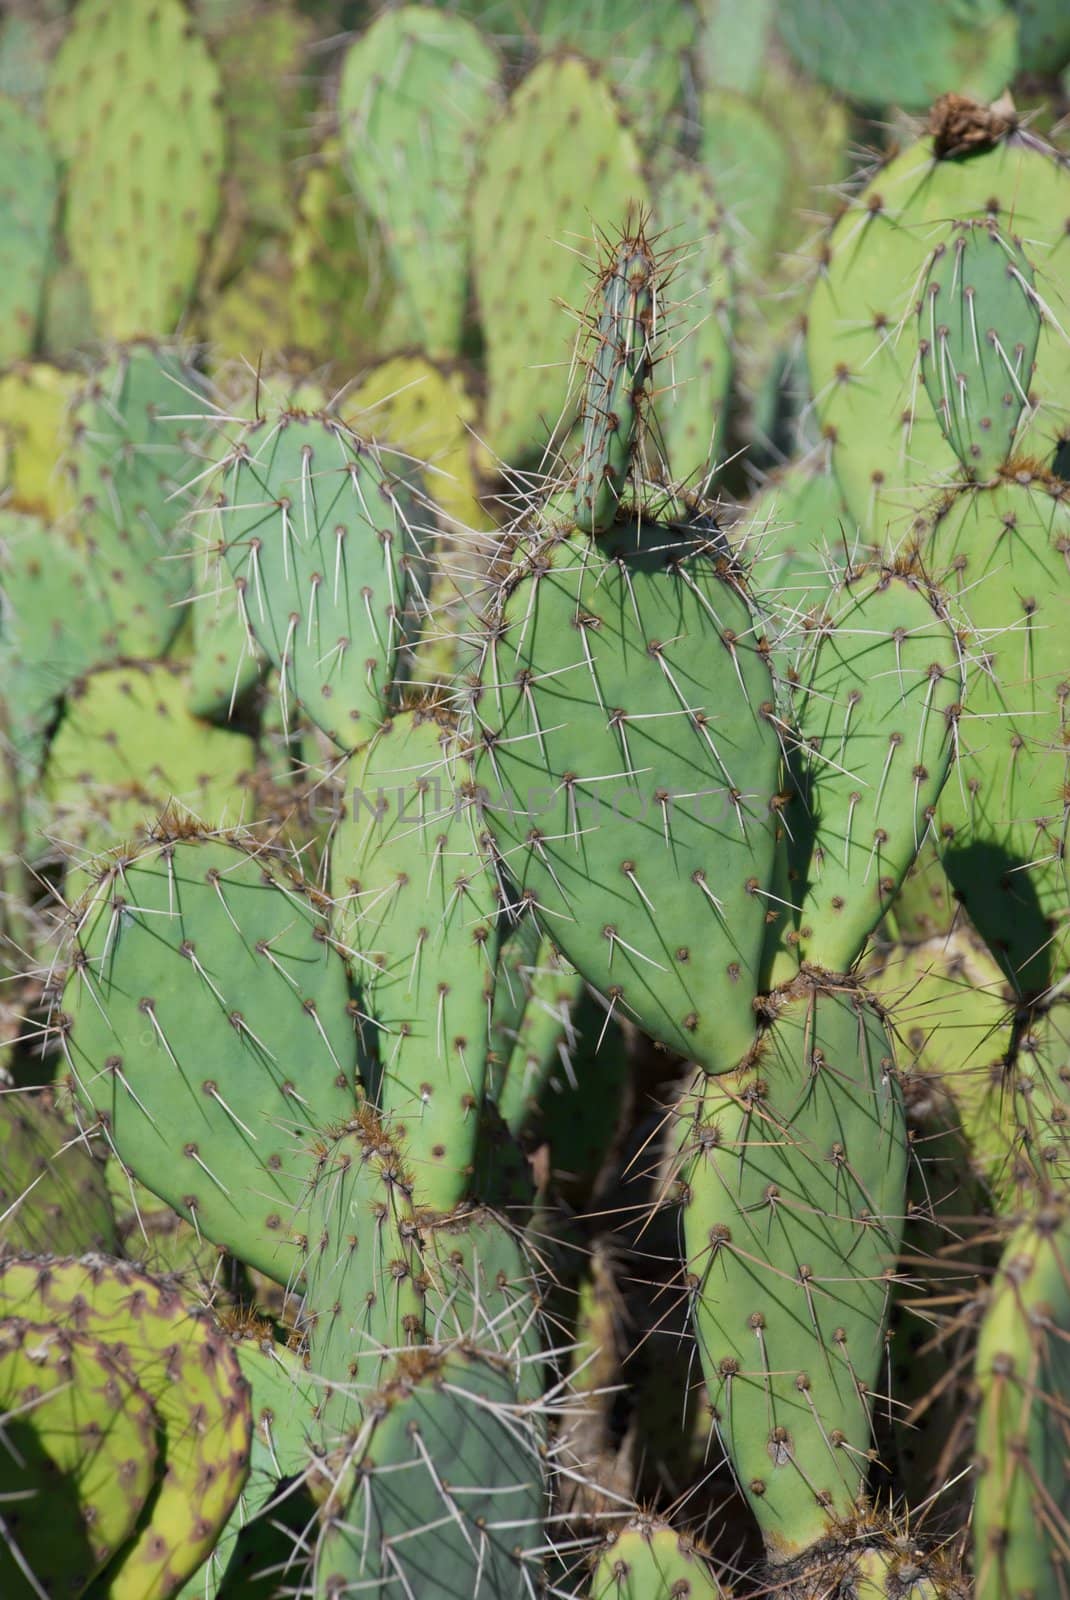 Bright Green Prickley Pear Cactus by pixelsnap